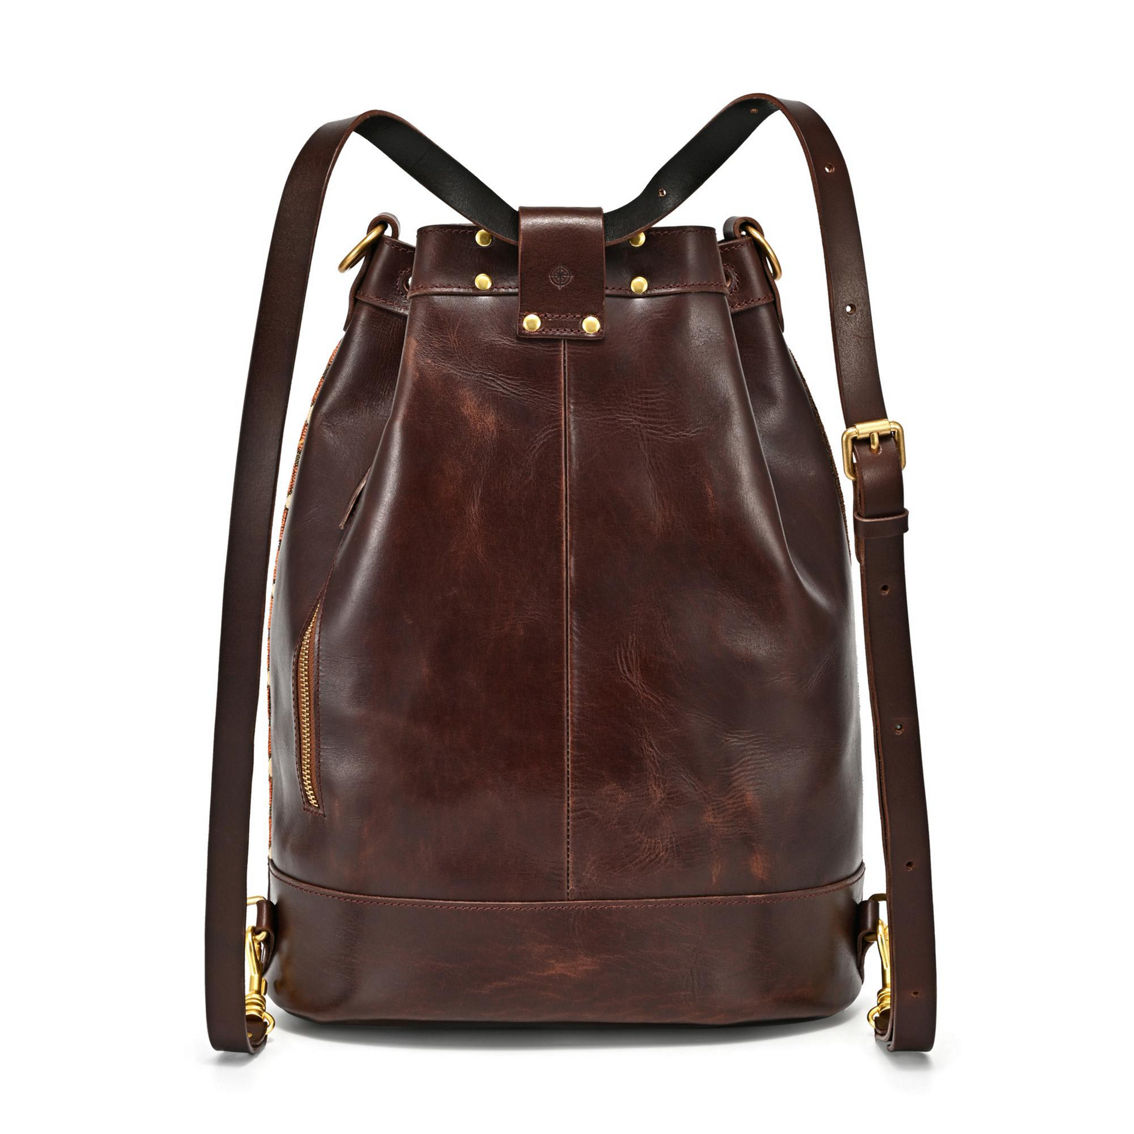 Old Trend Myrtle Convertible Leather Bucket Backpack - Image 5 of 5